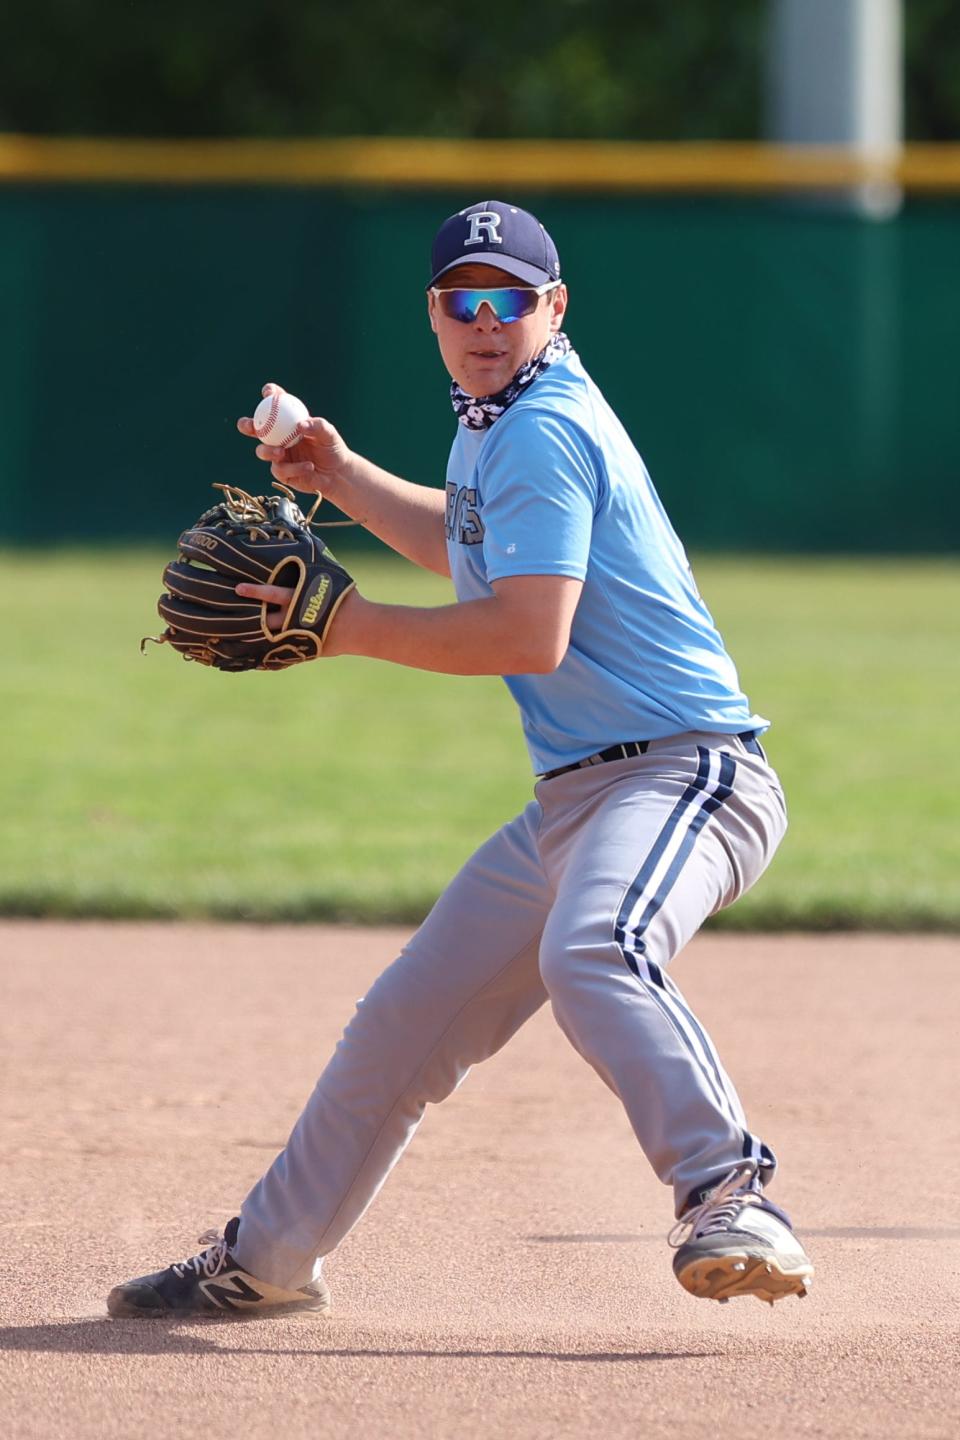 Rootstown second baseman Blake Bower looks to make a throw to first during Thursday night’s game against South Range.